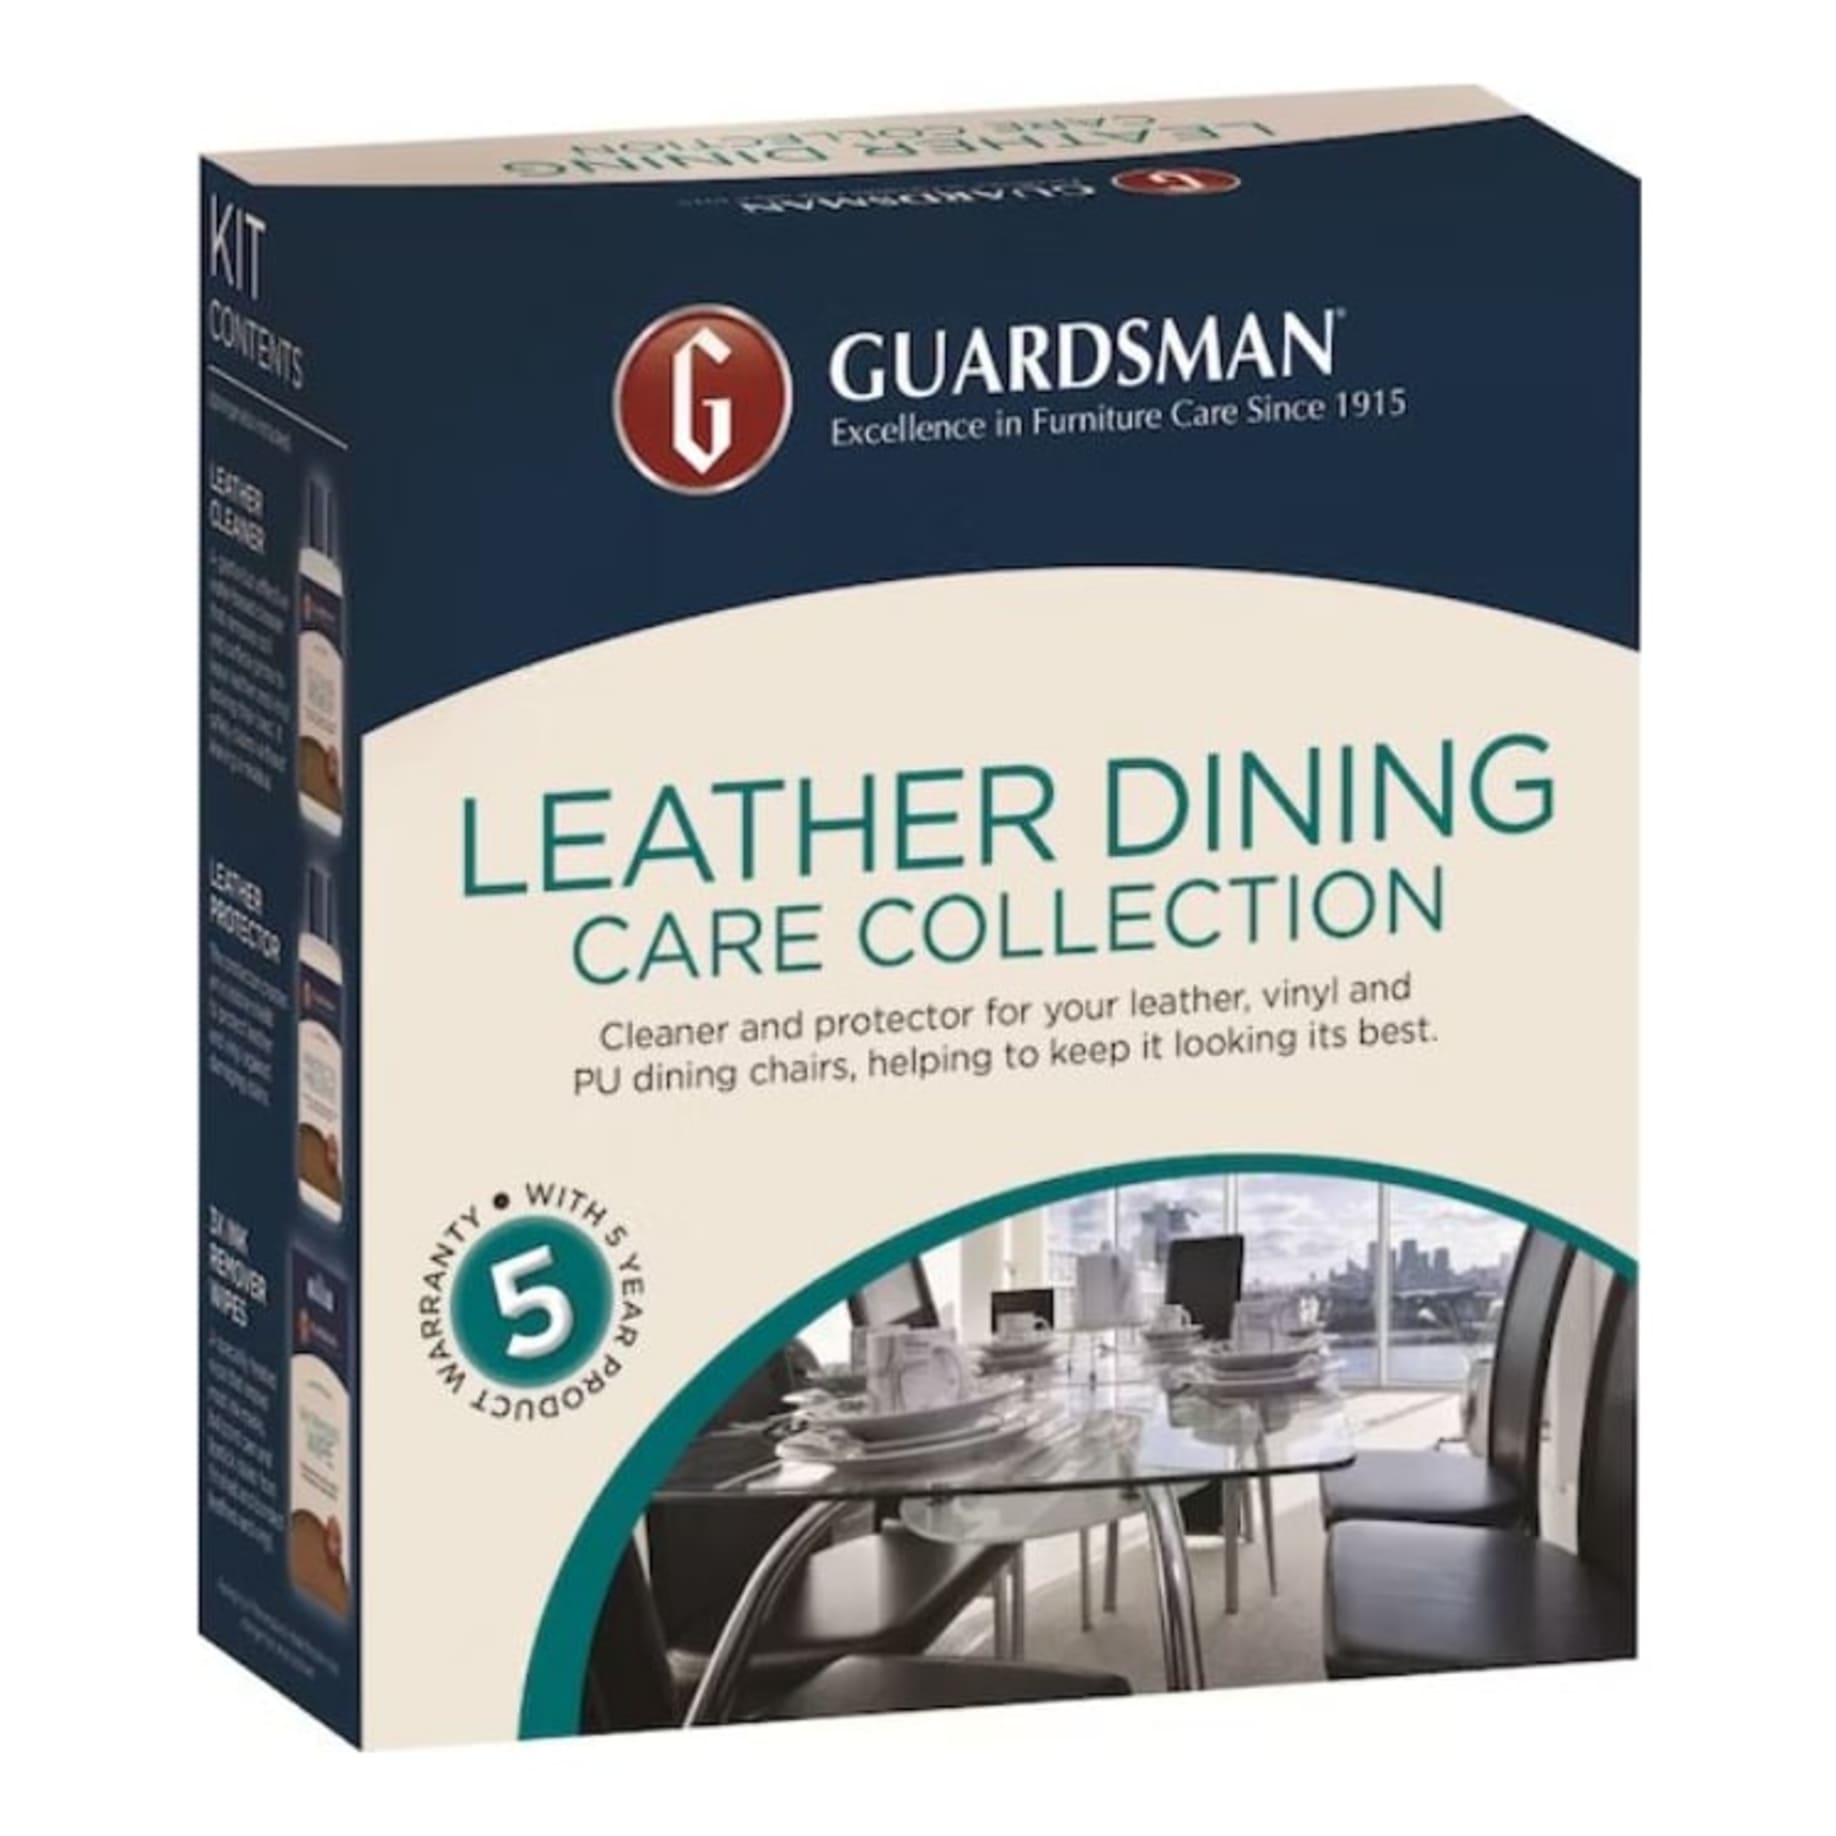 Guardsman Timber / Leather Dining Warranty